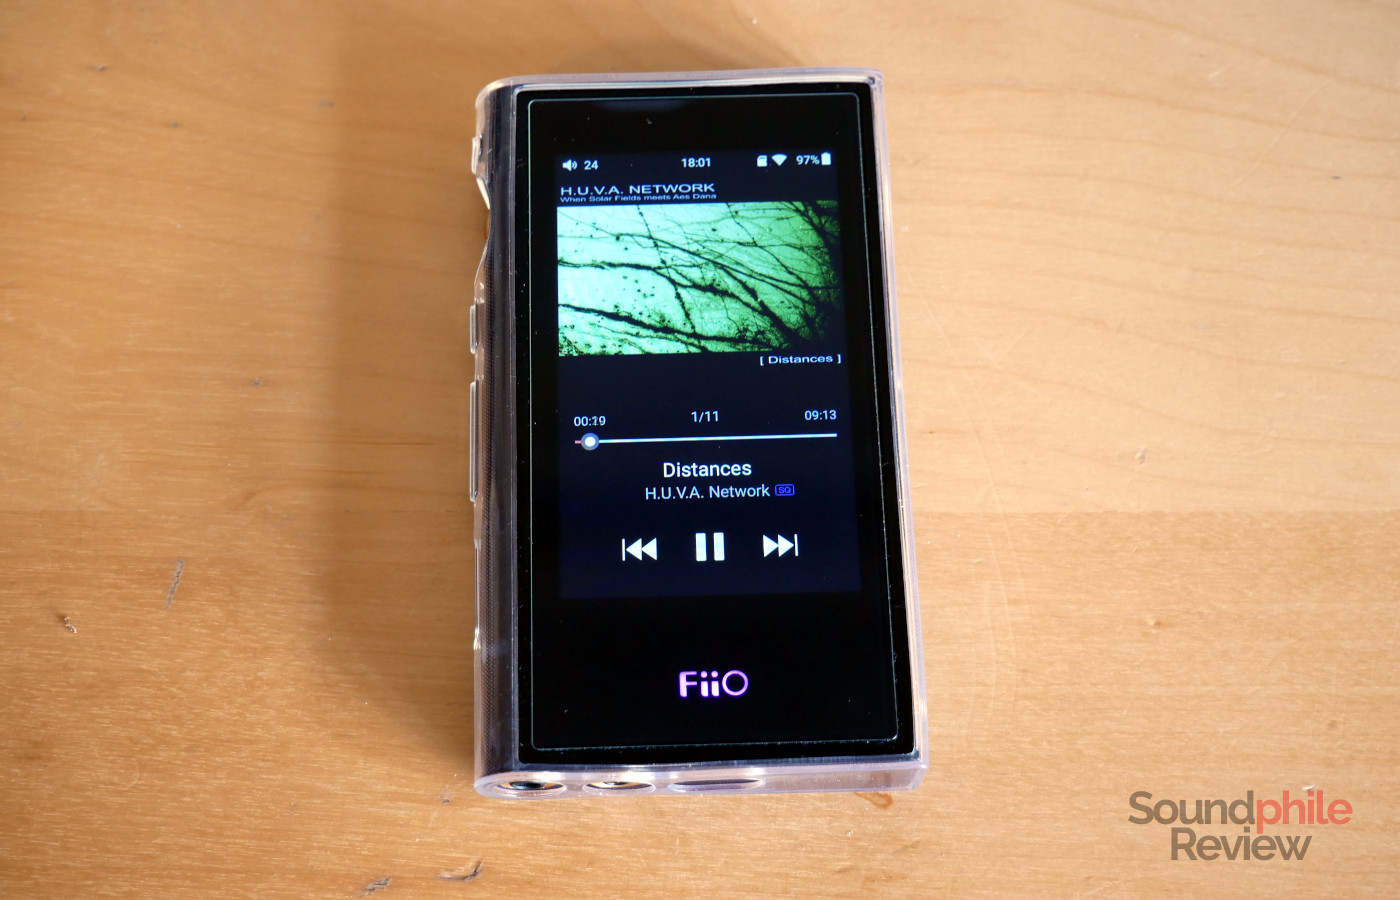 FiiO M9 review: well-rounded - Soundphile Review